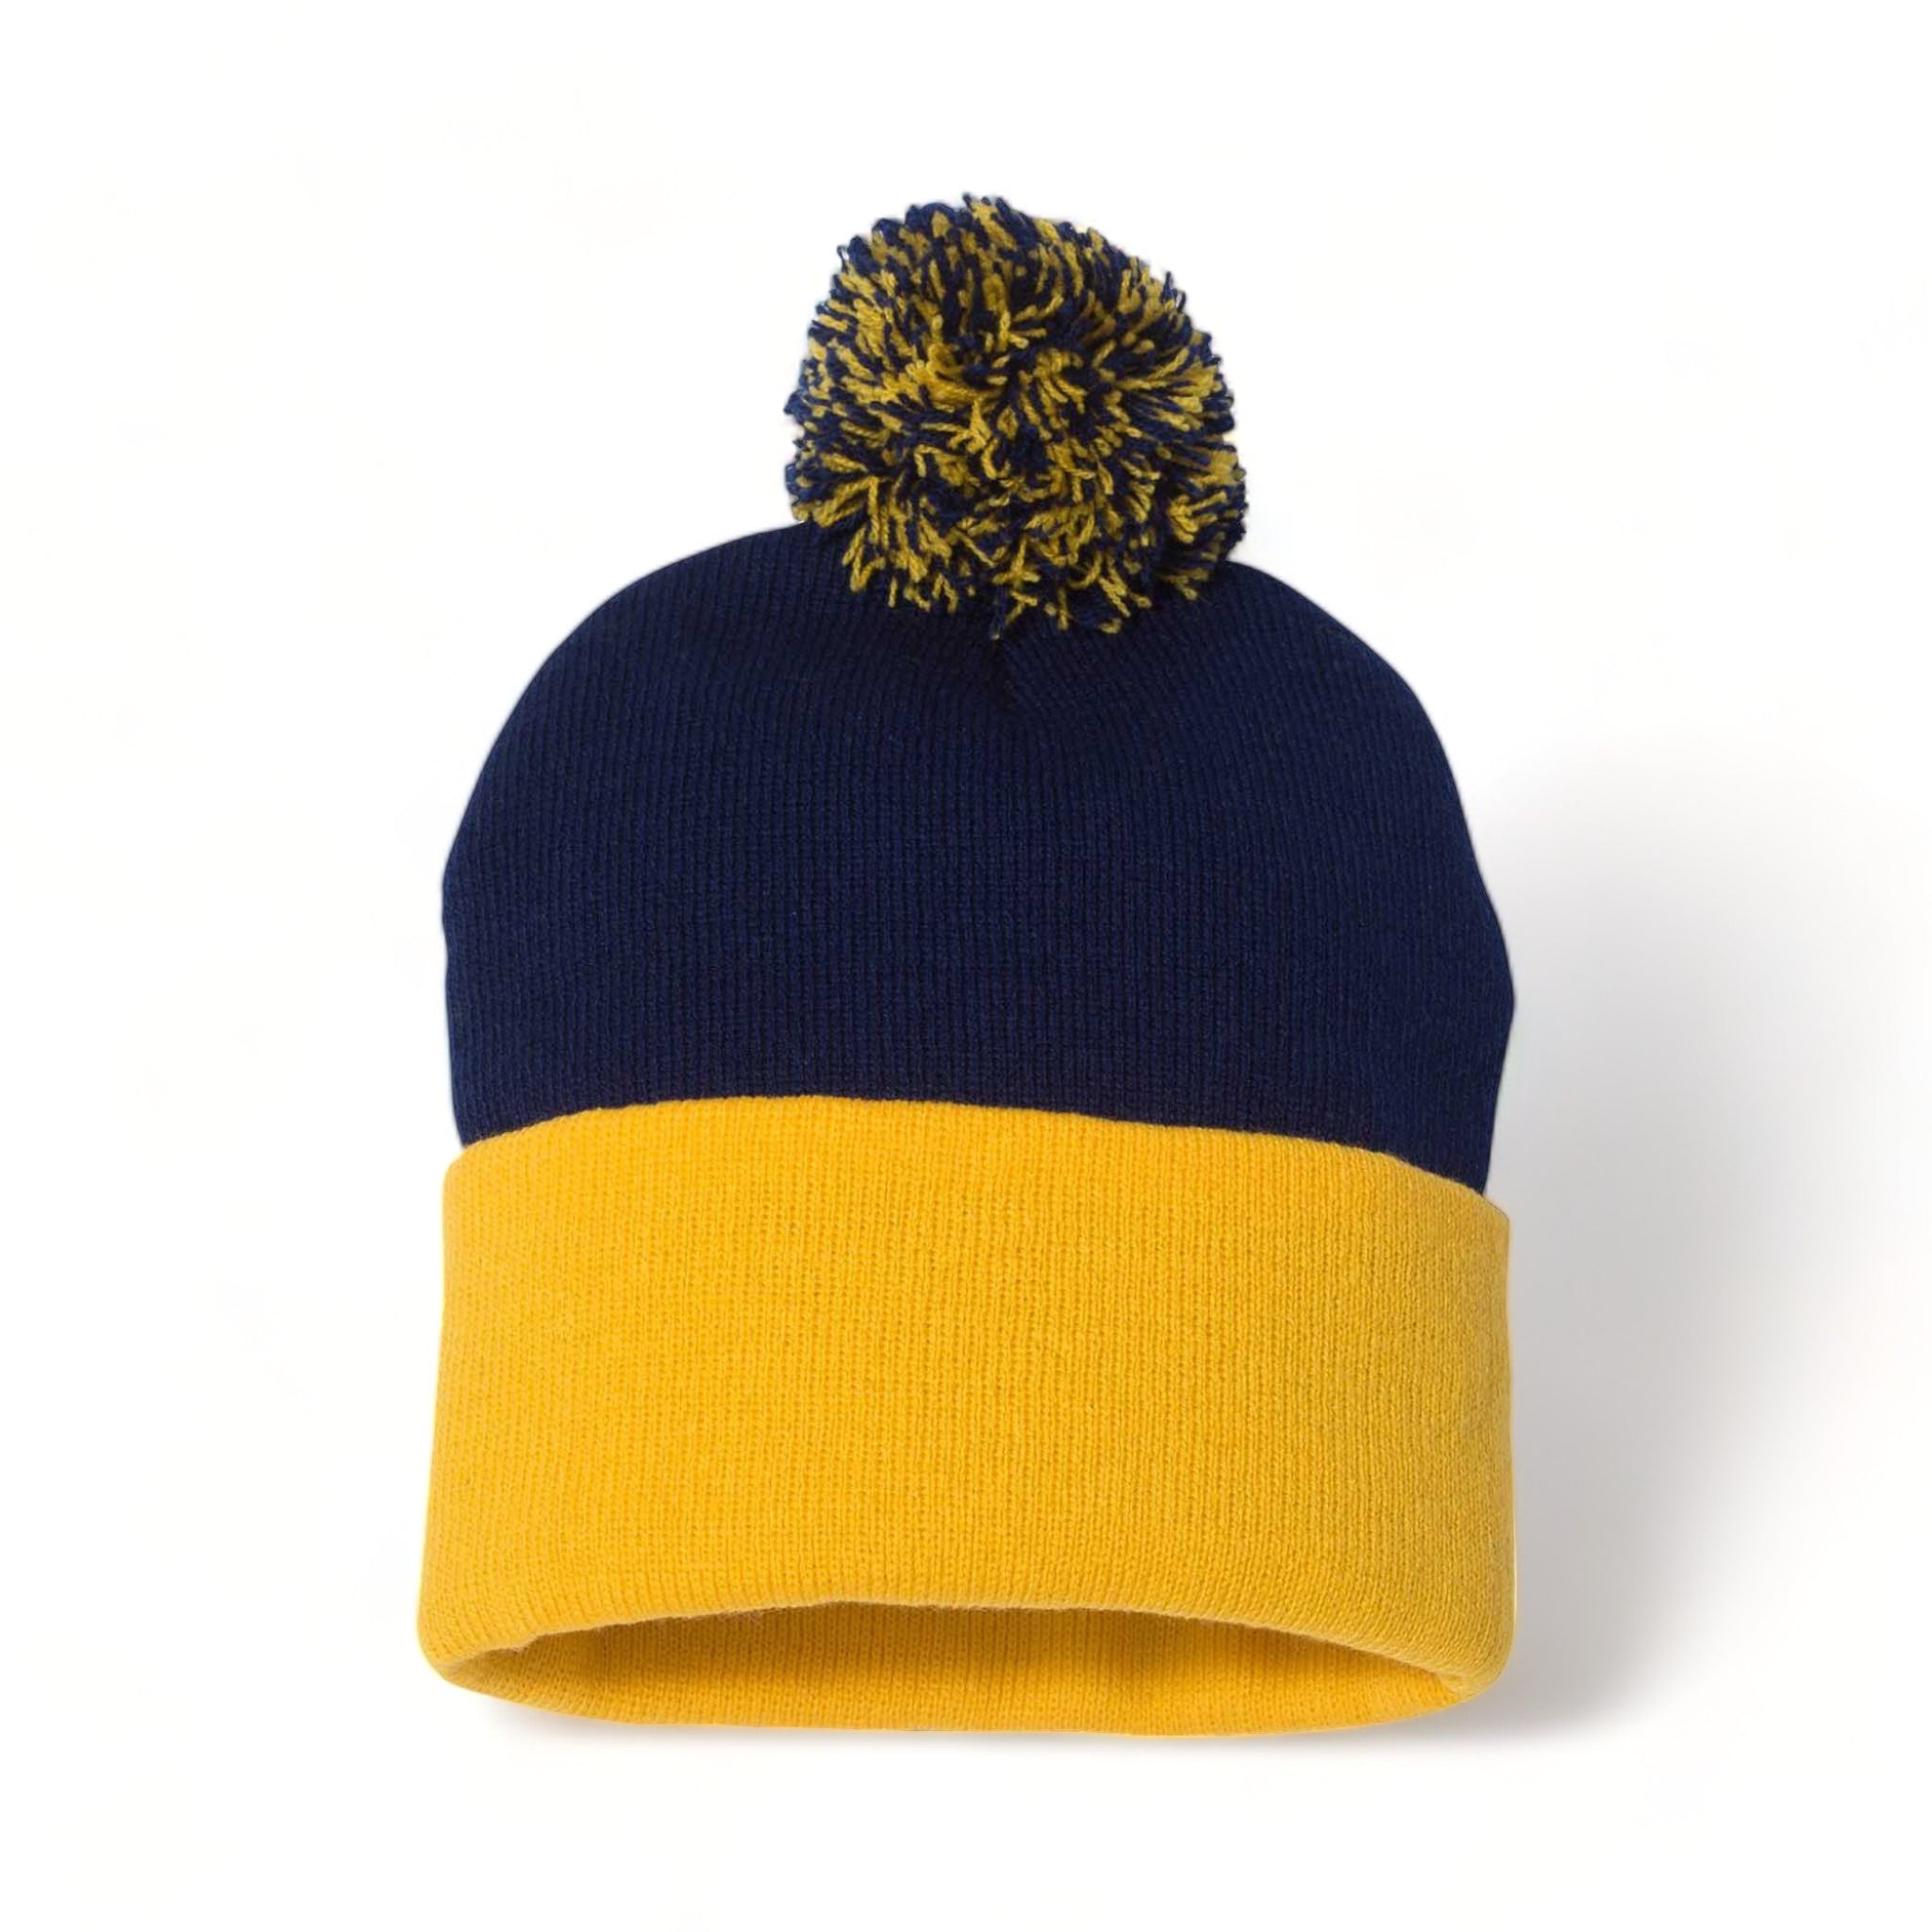 Sportsman SP15 custom beanie in navy and gold